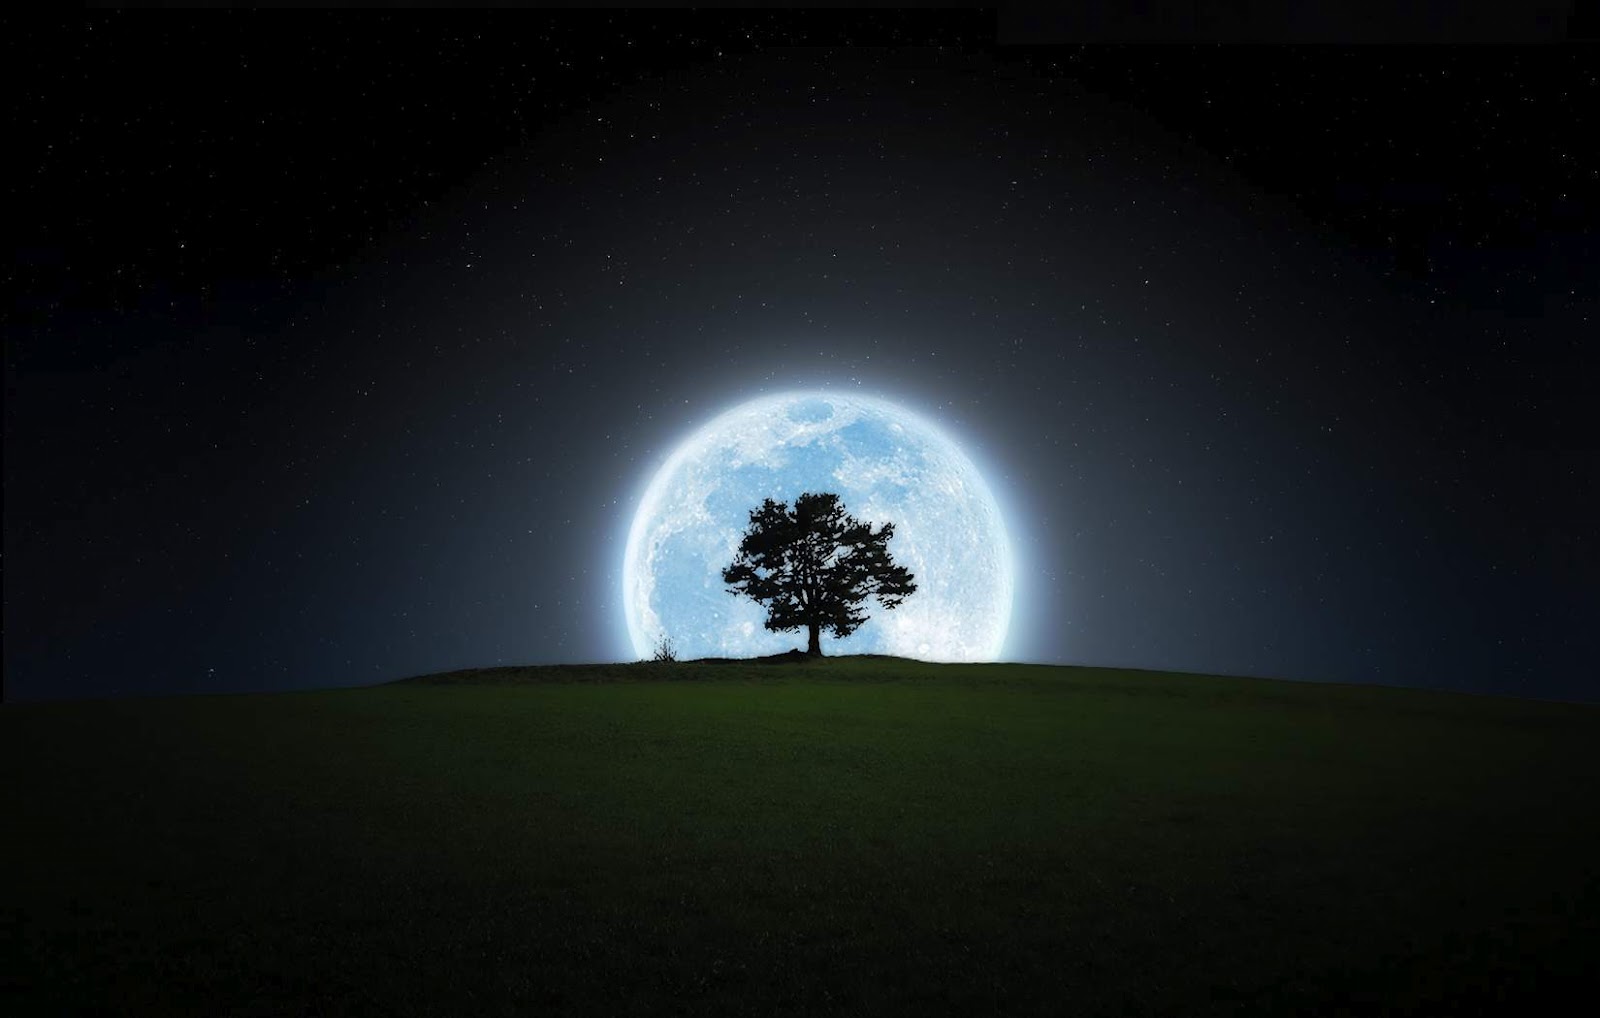 Black And White Wallpapers: Full Moon And Tree Wallpaper